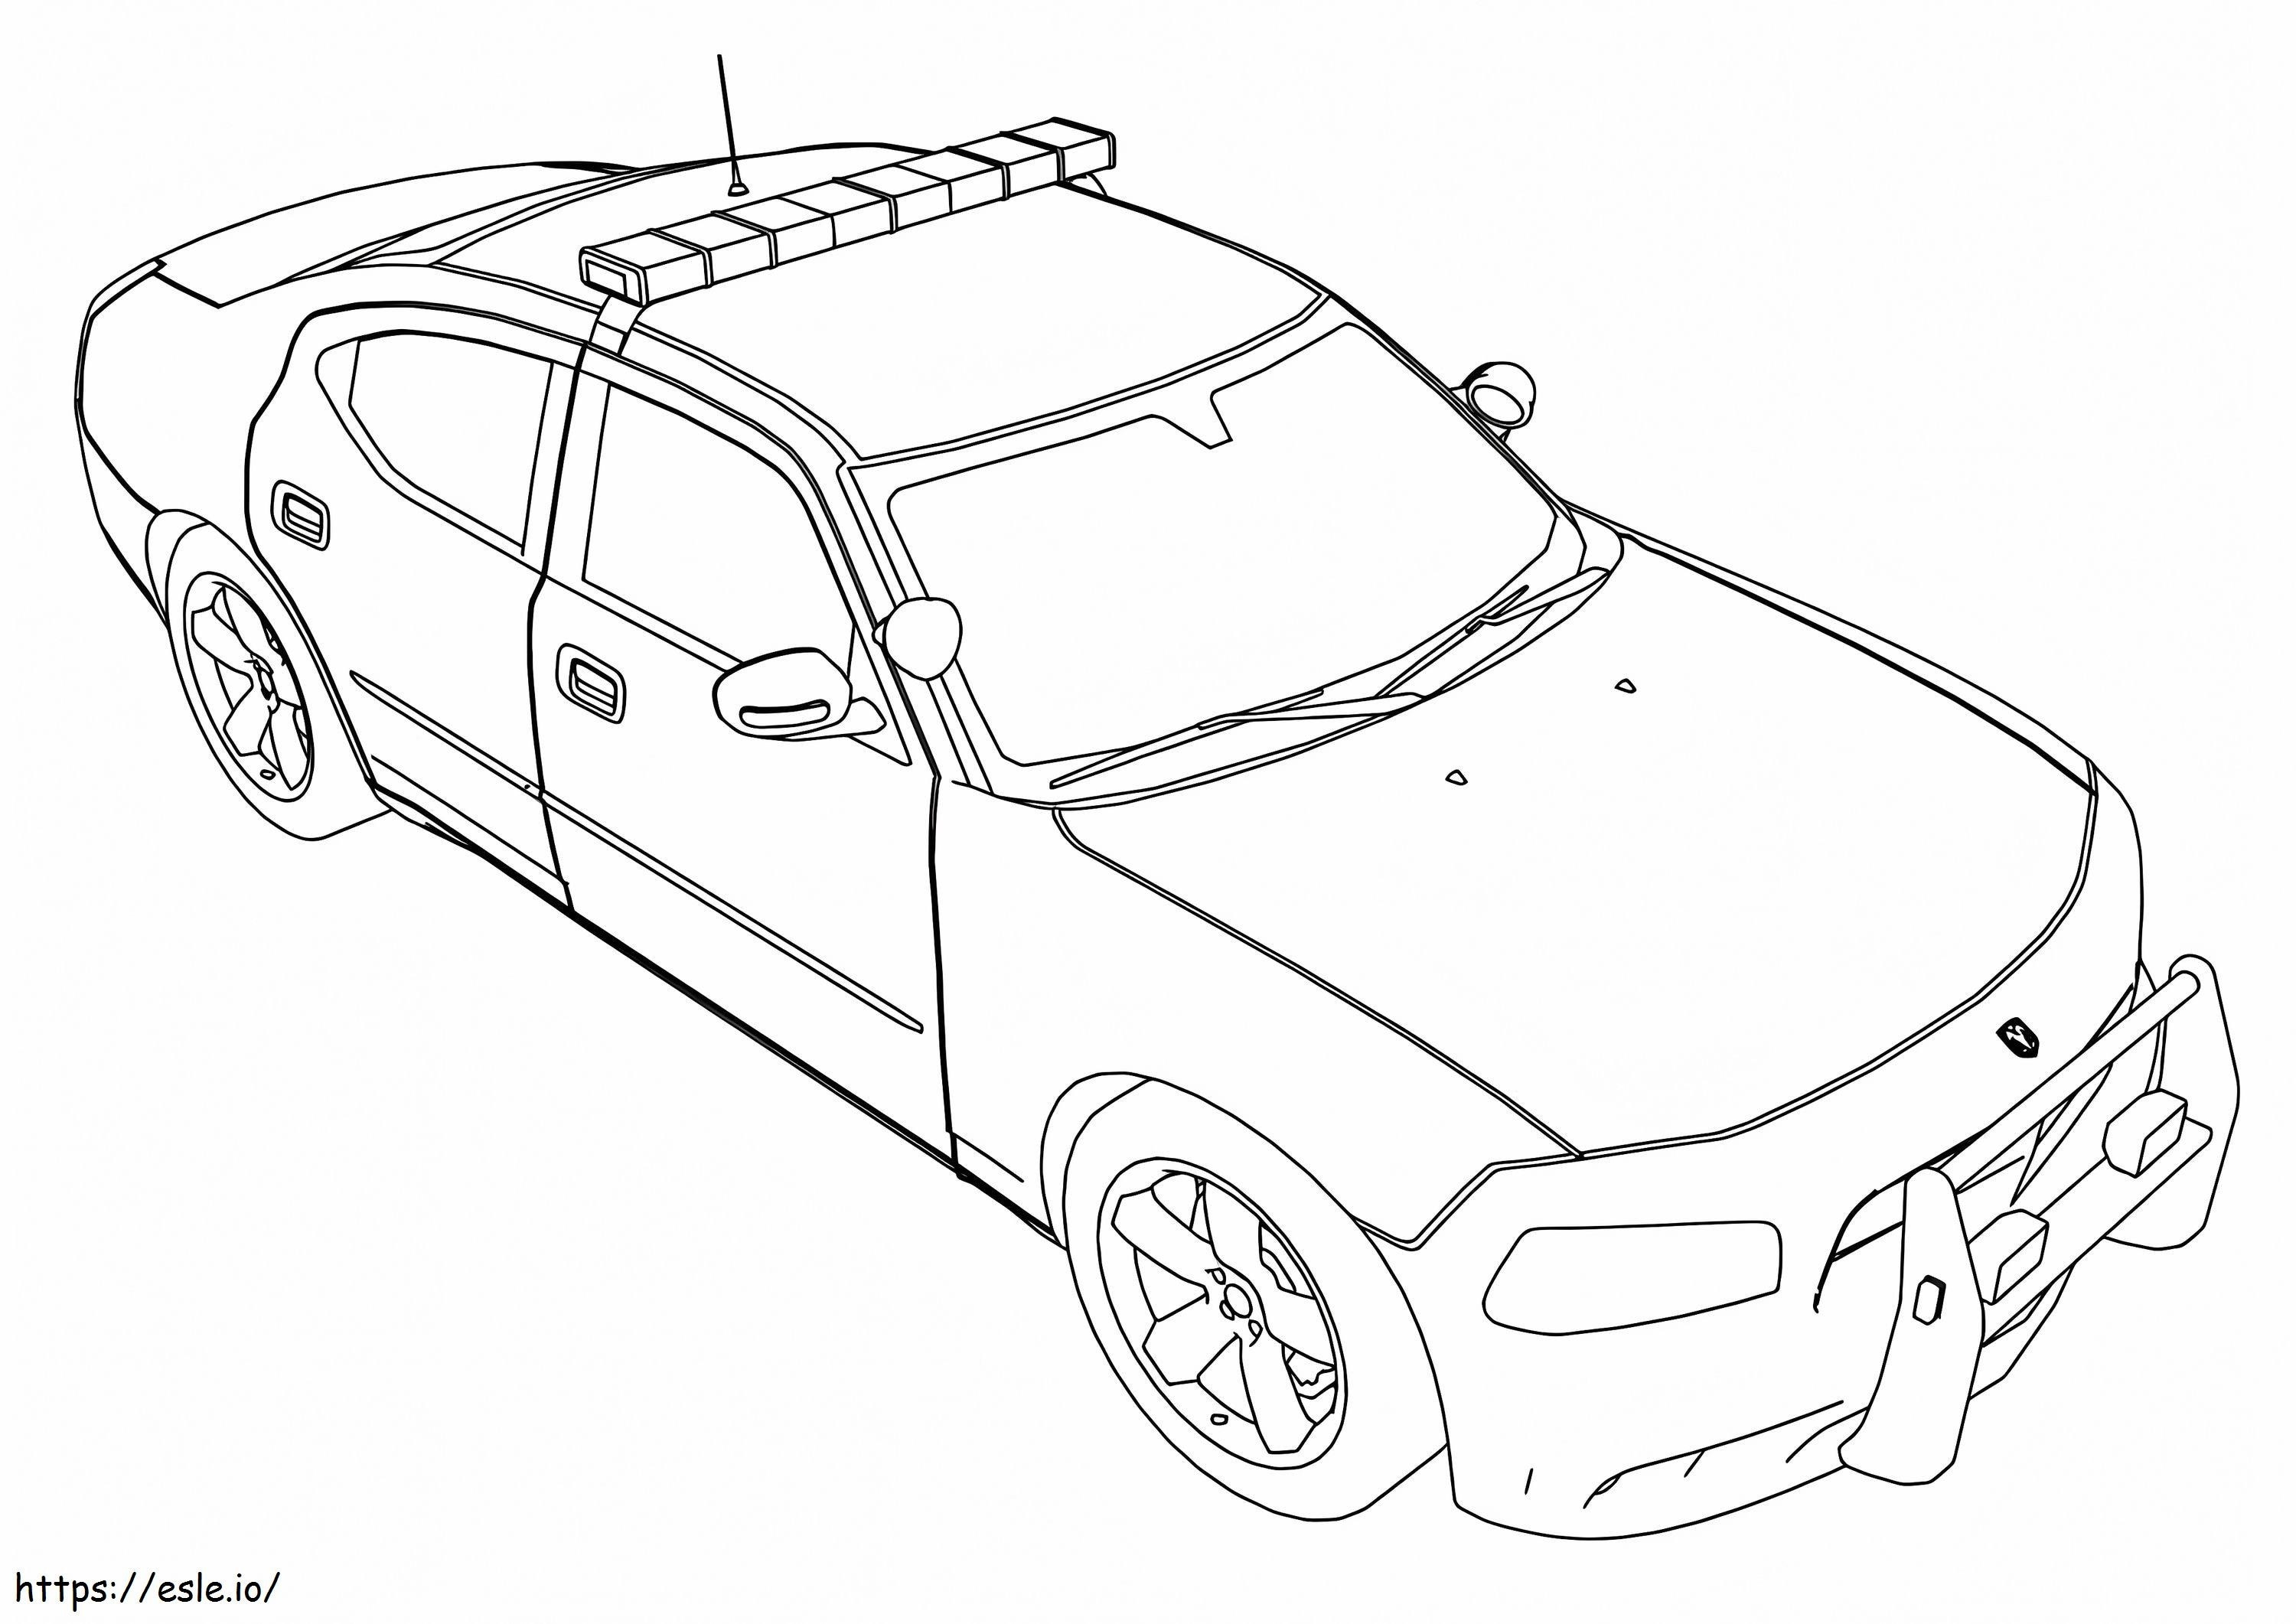 Police Car 3 coloring page